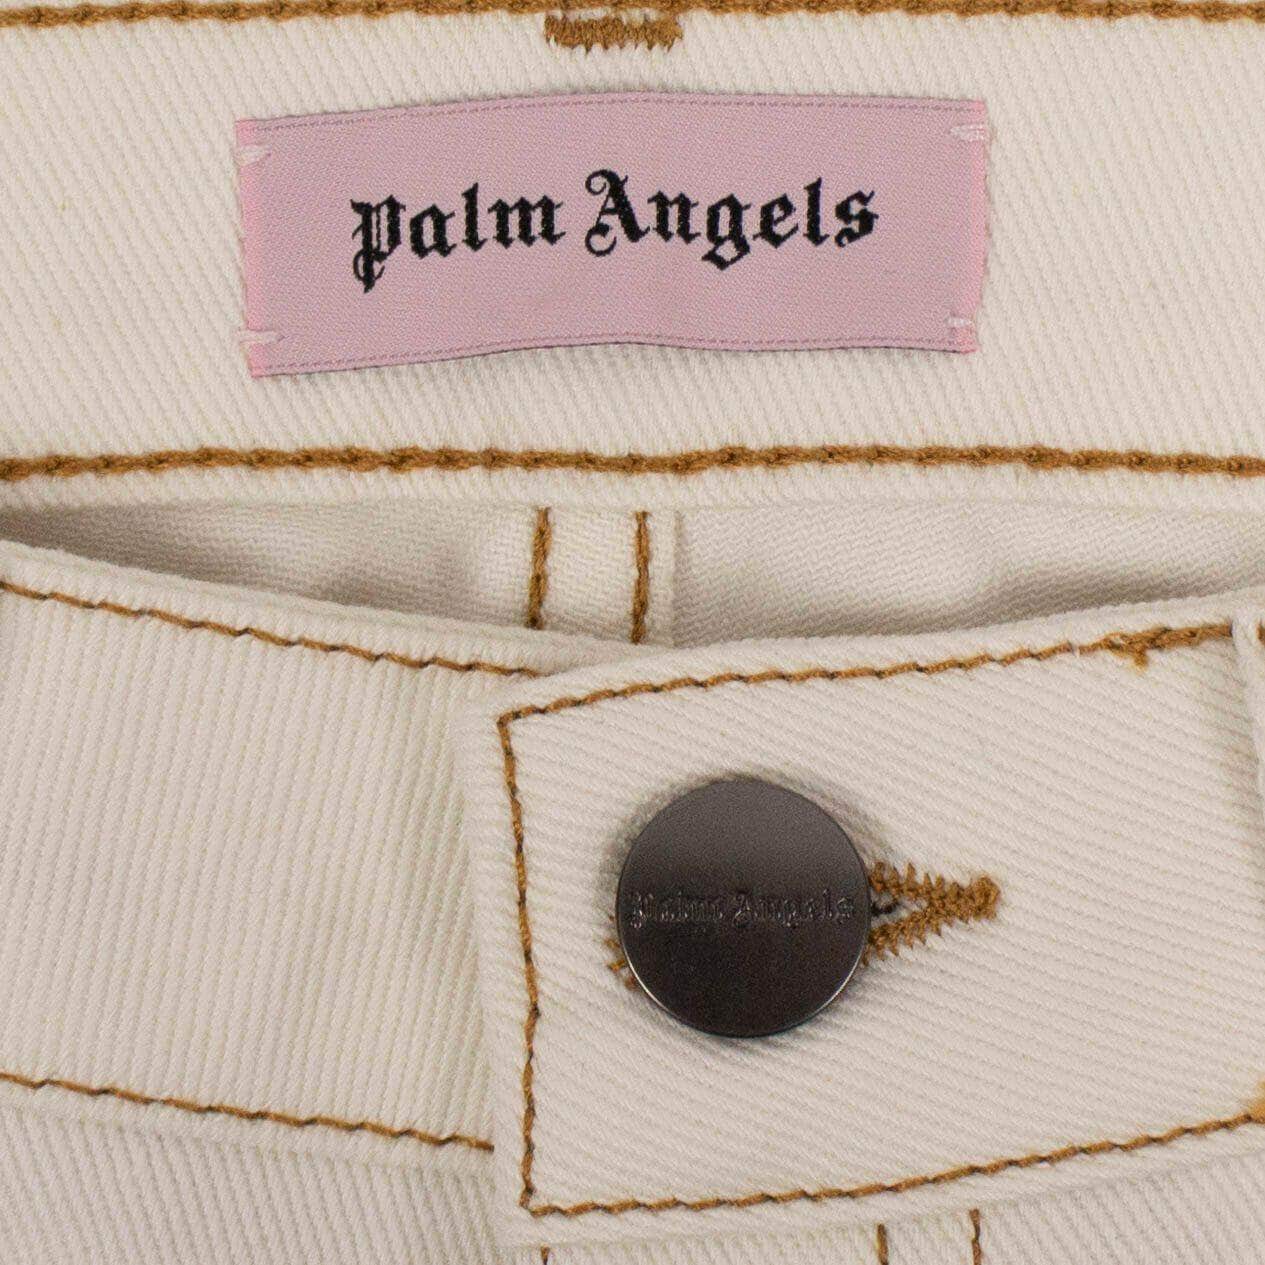 Palm Angels Women's Jeans Denim Yellow Stripped Stretch Jeans - White